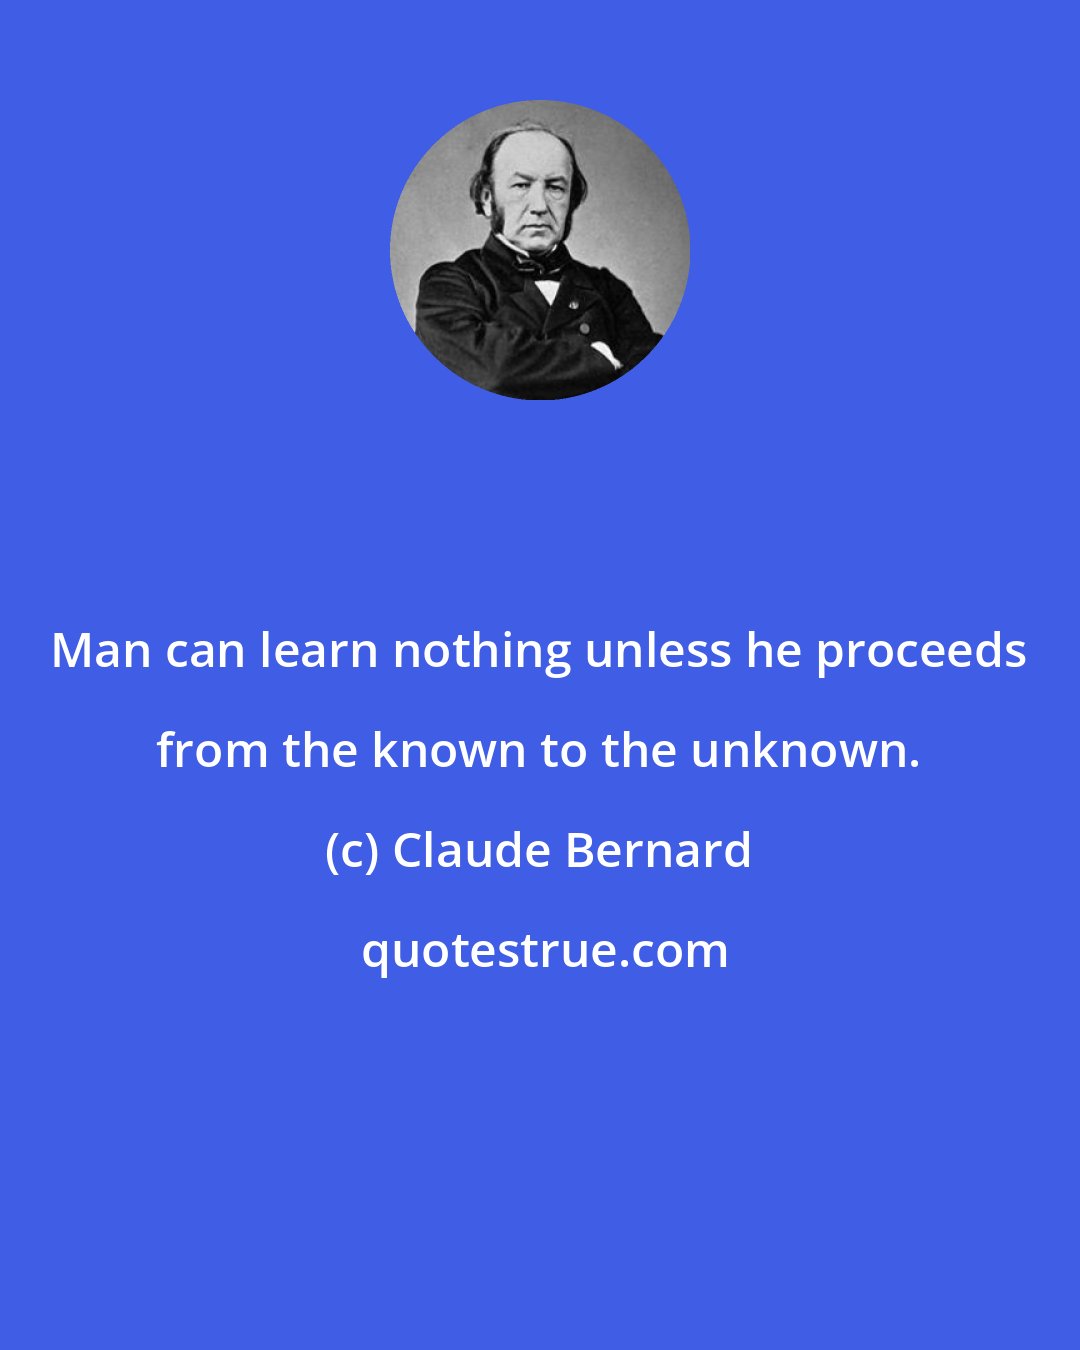 Claude Bernard: Man can learn nothing unless he proceeds from the known to the unknown.